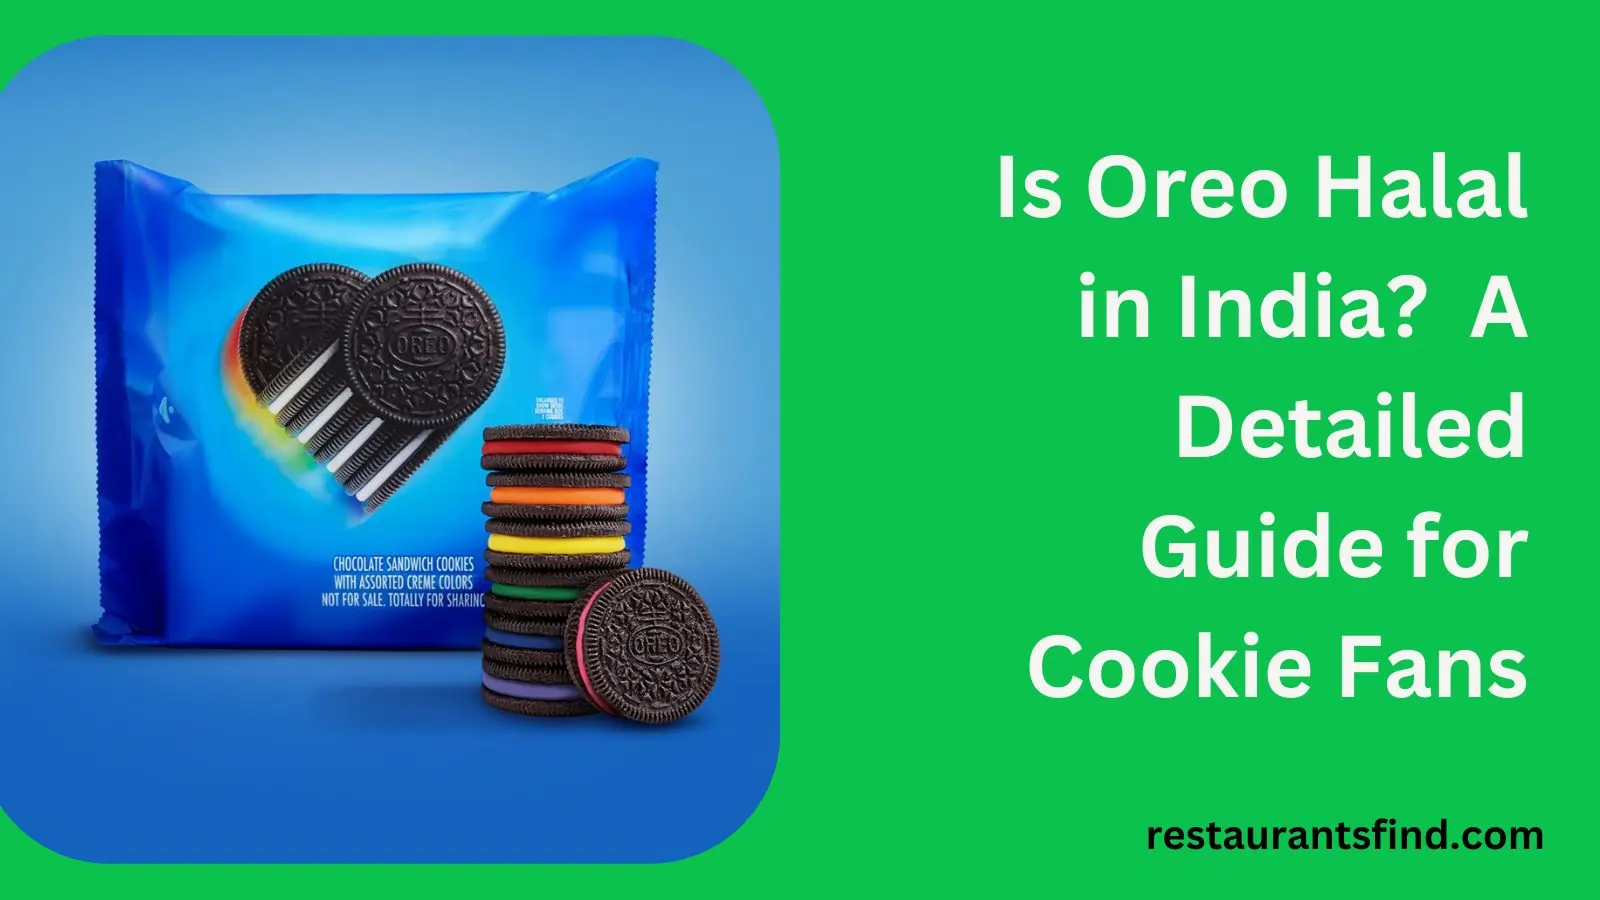 Is Oreo Halal in India?